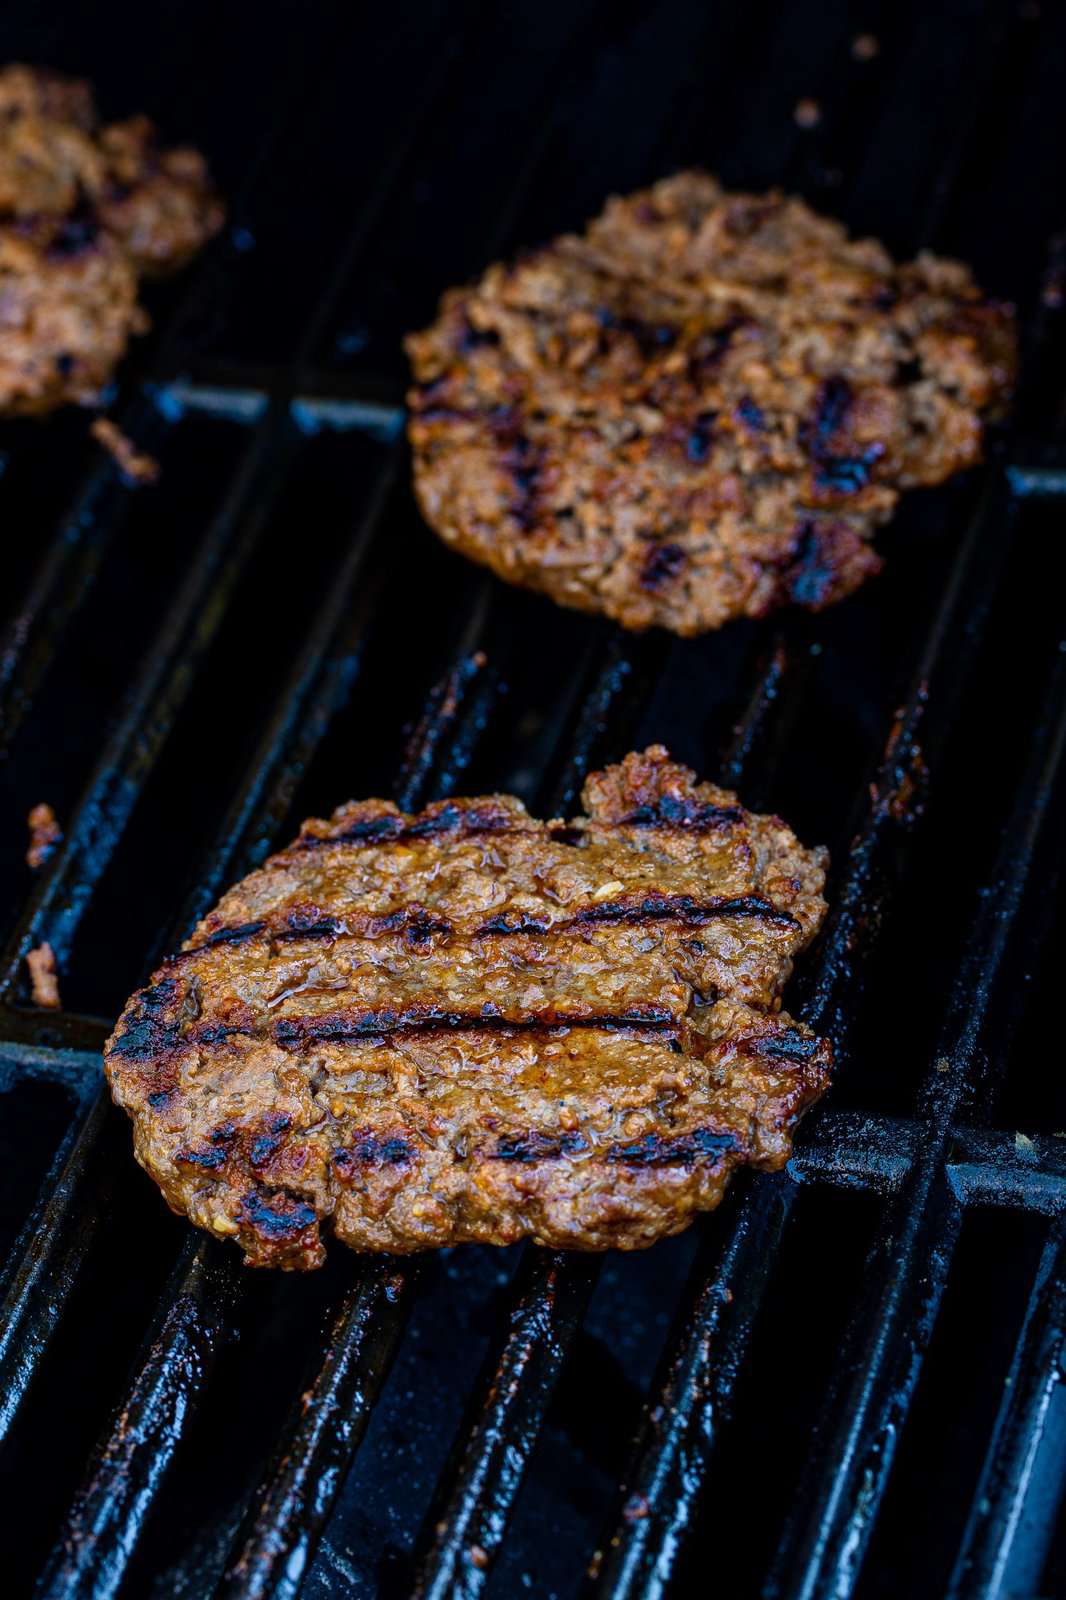 Burgers finished cooking on grill.